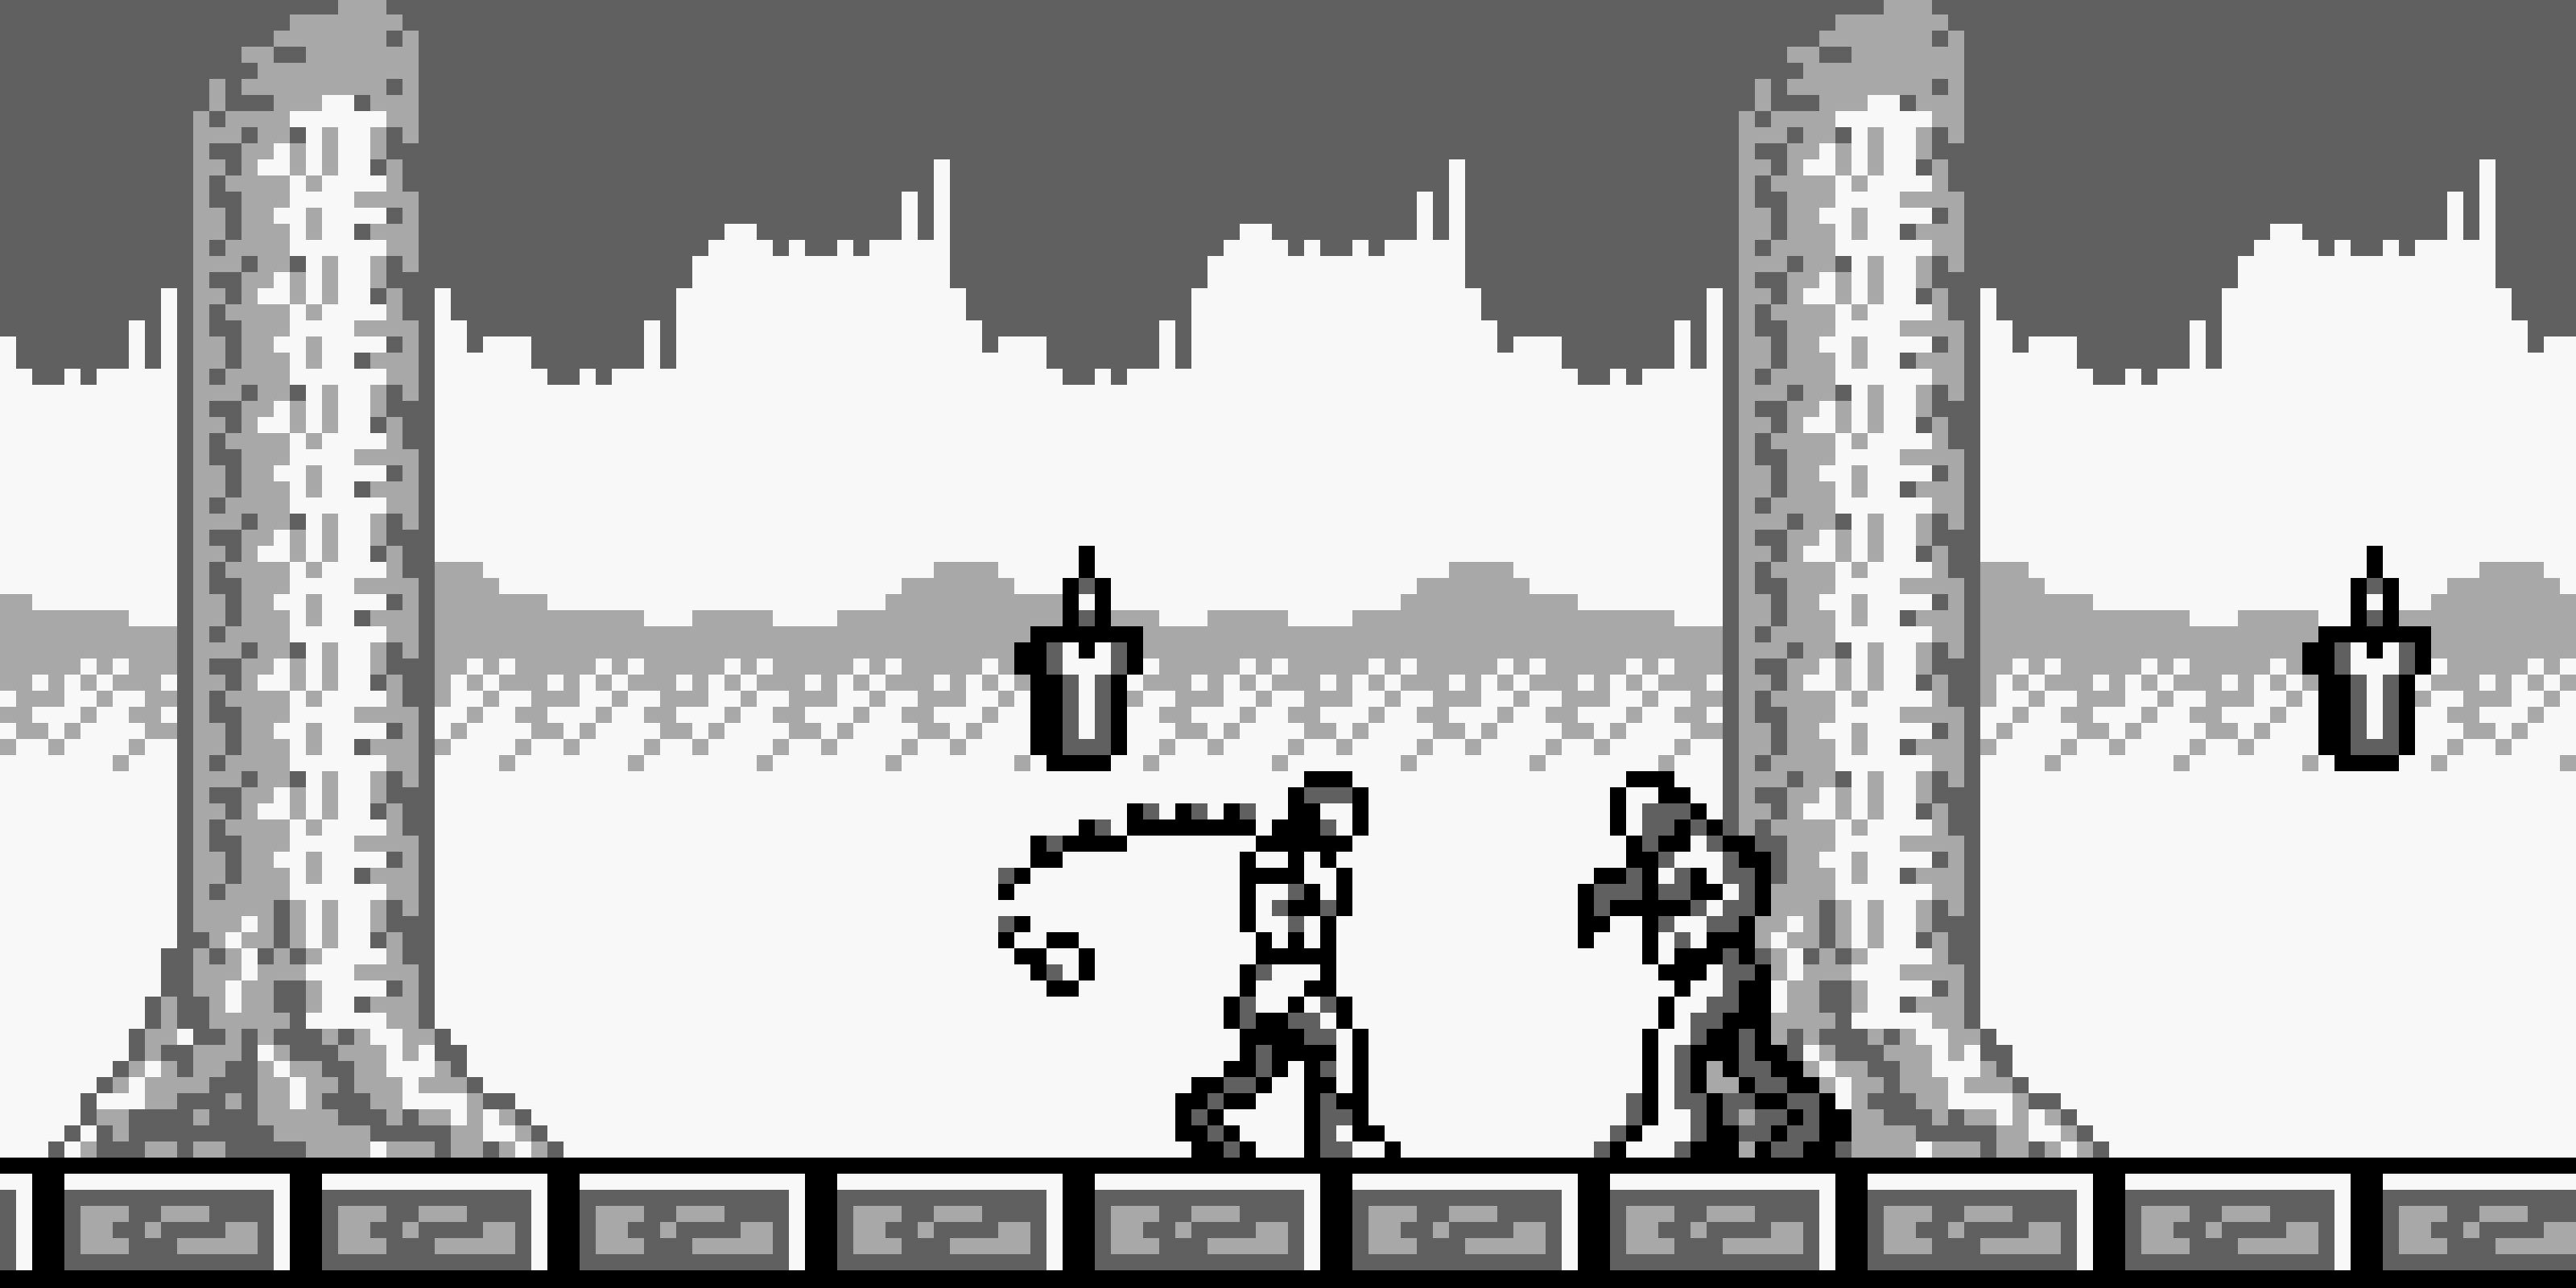 Gameplay from Castlevania The Adventure on Game Boy